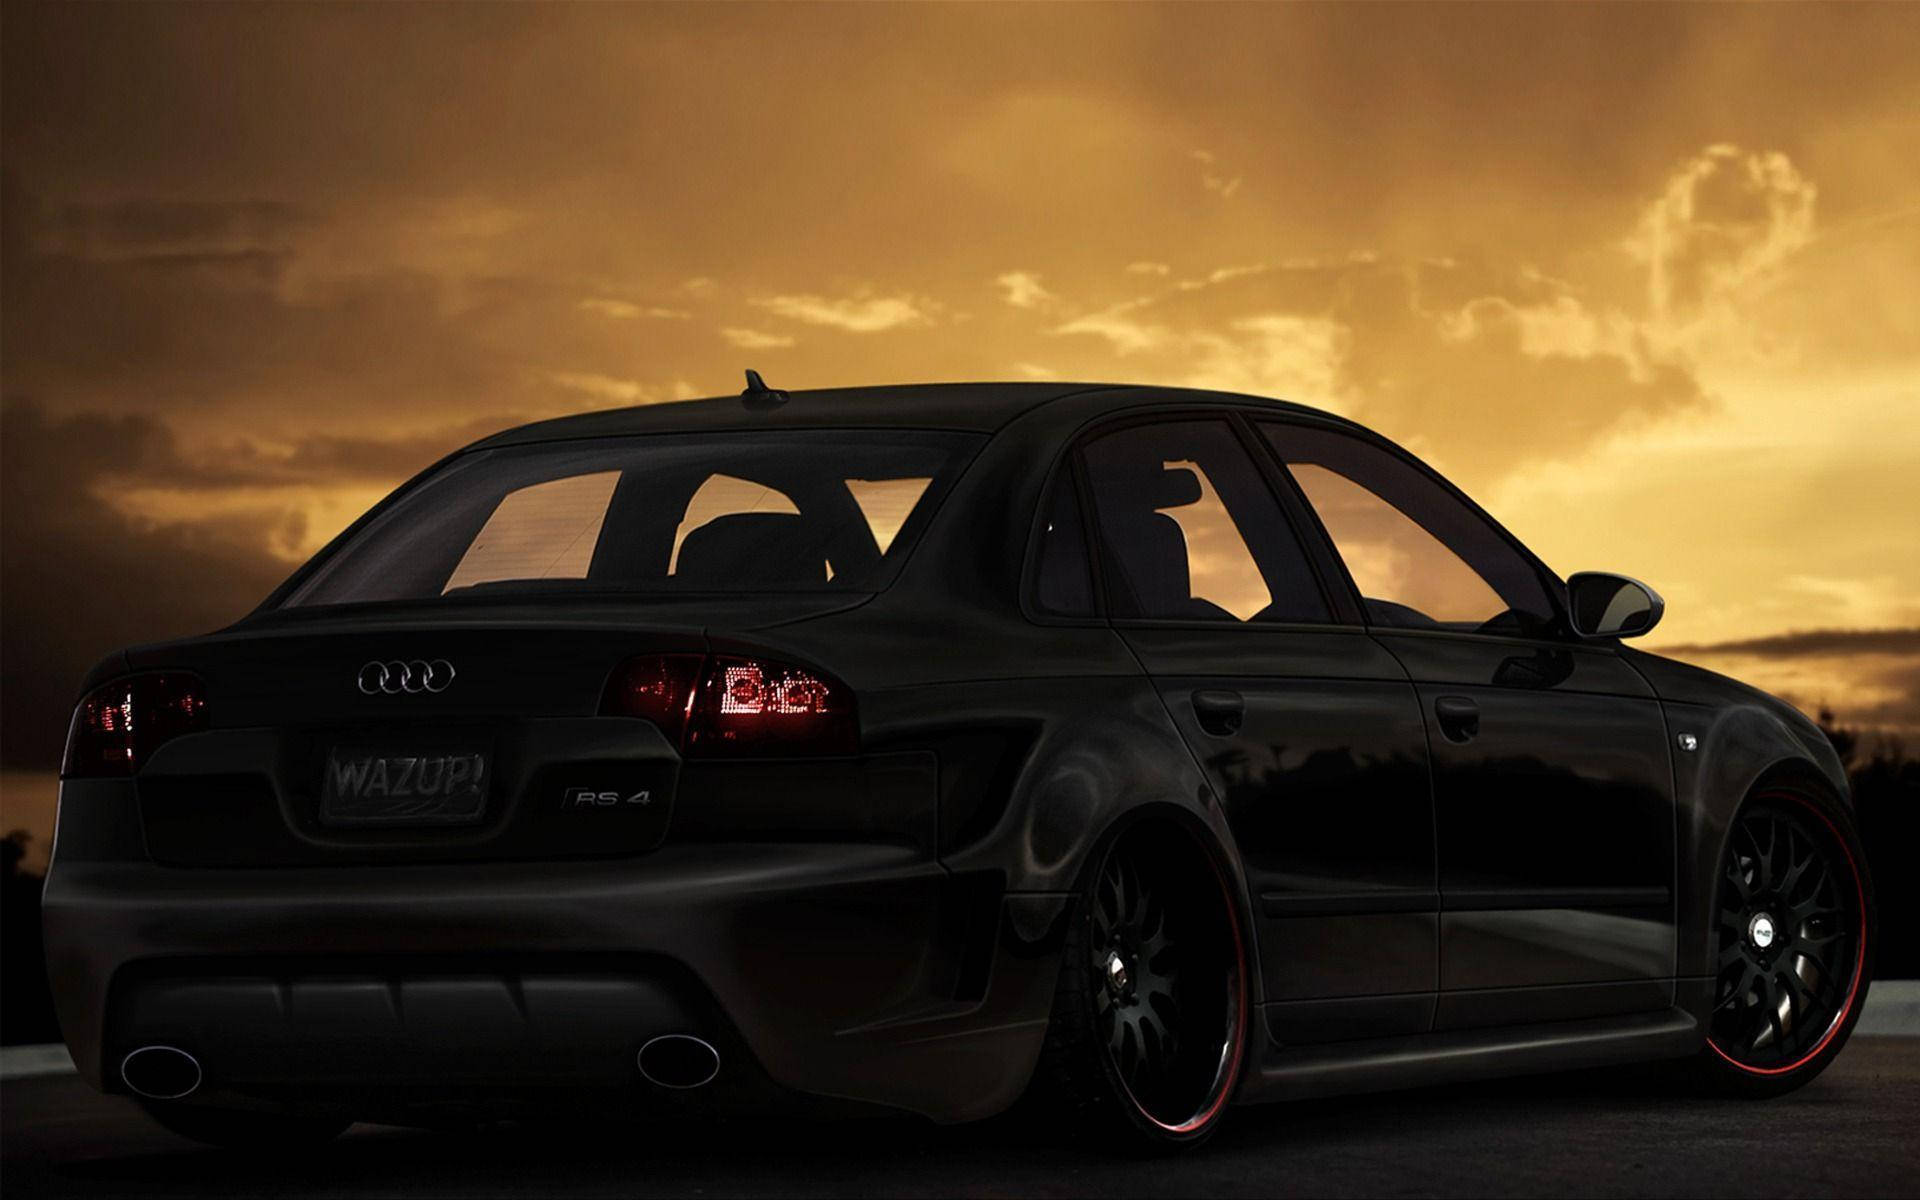 Silhouette of the 2007 Audi RS 4 Wallpaper